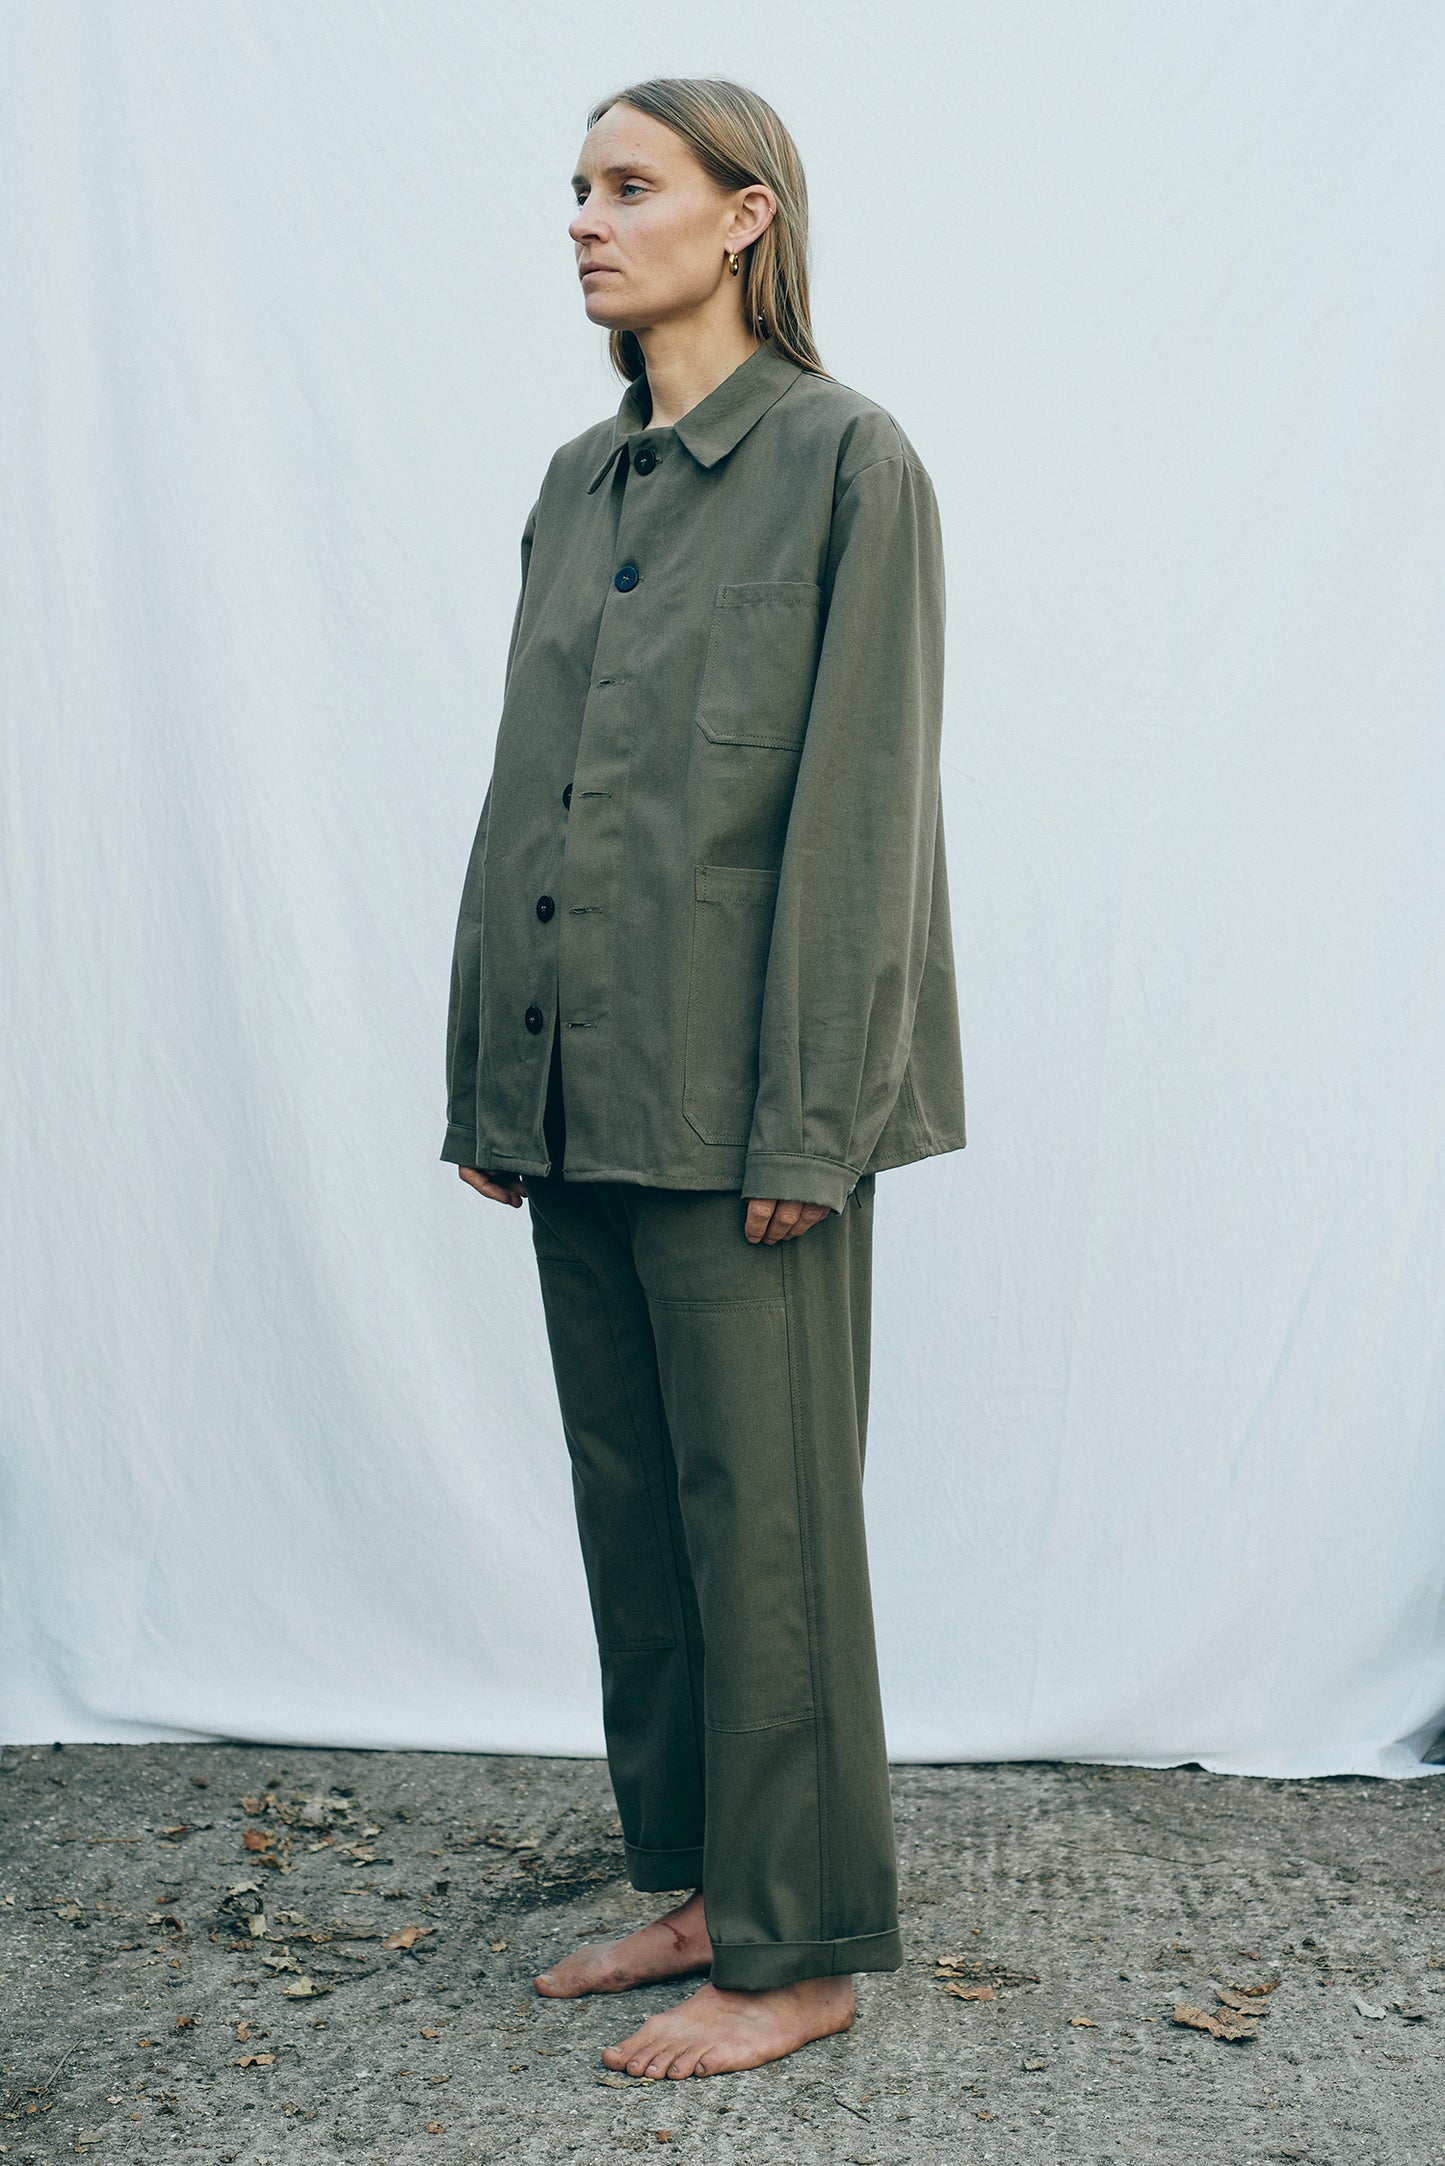 Propagator's Jacket with Liner - Natural Raw Linen